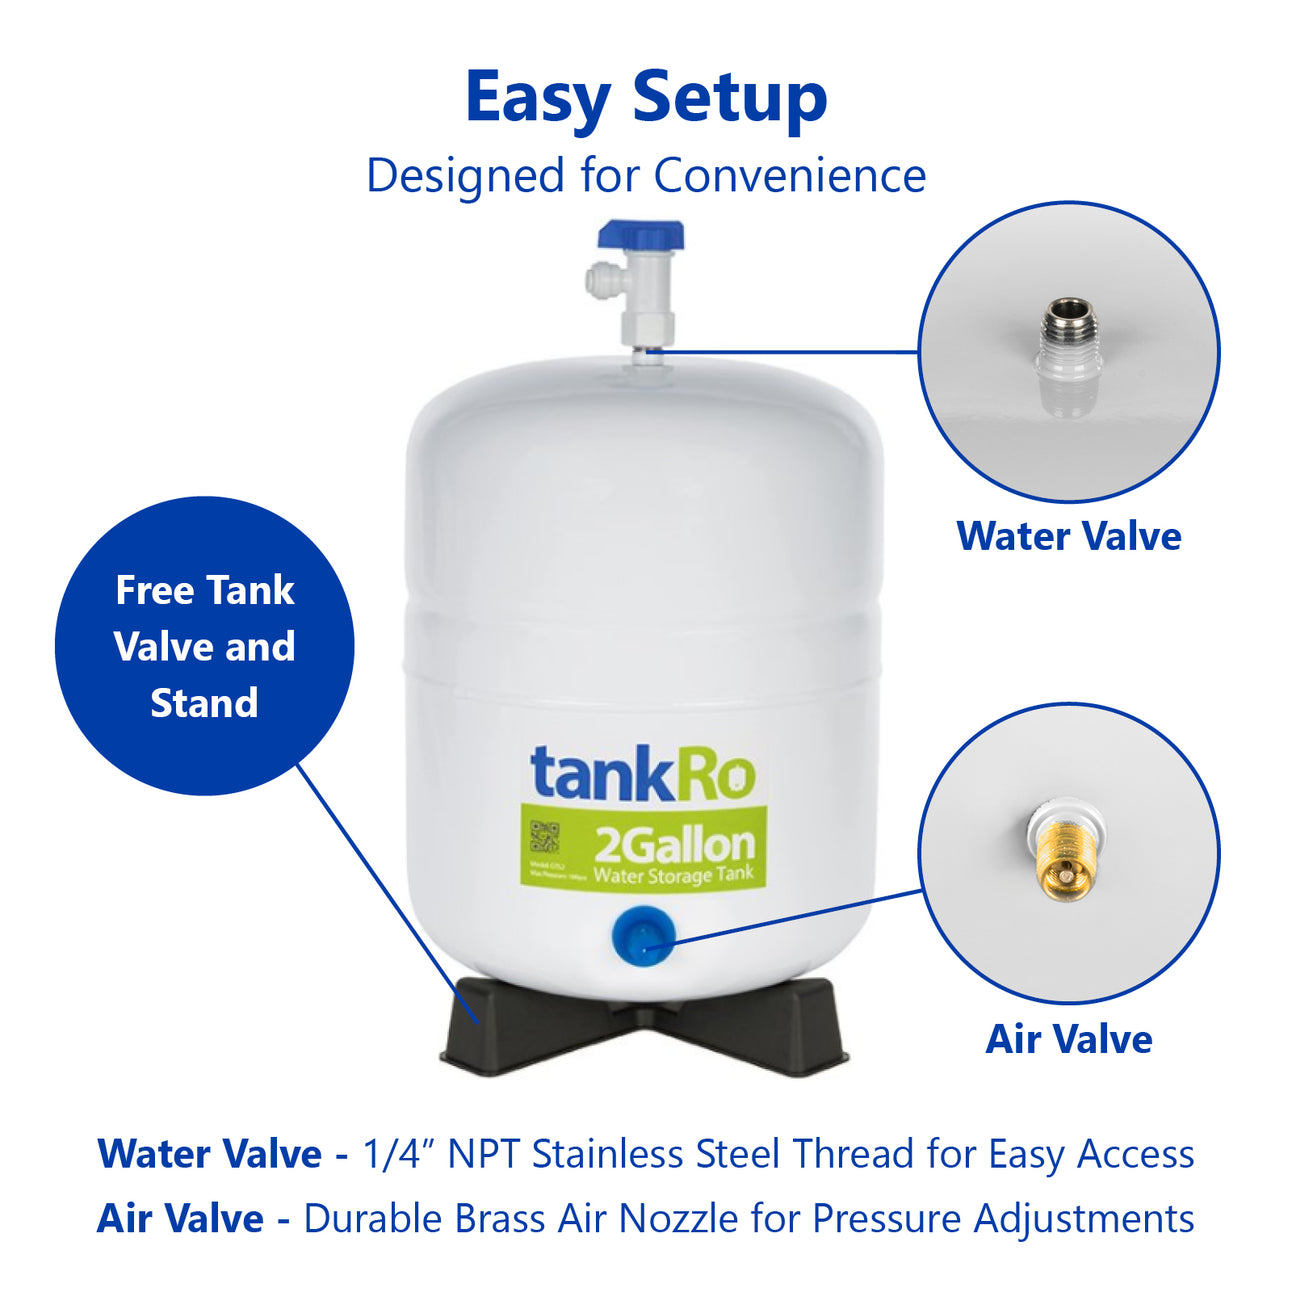 tankRO – RO Water Filtration System Expansion Tank – 2 Gallon Water Tank – Compact Reverse Osmosis Water Storage Pressure Tank with Free 1/4" Tank Ball Valve